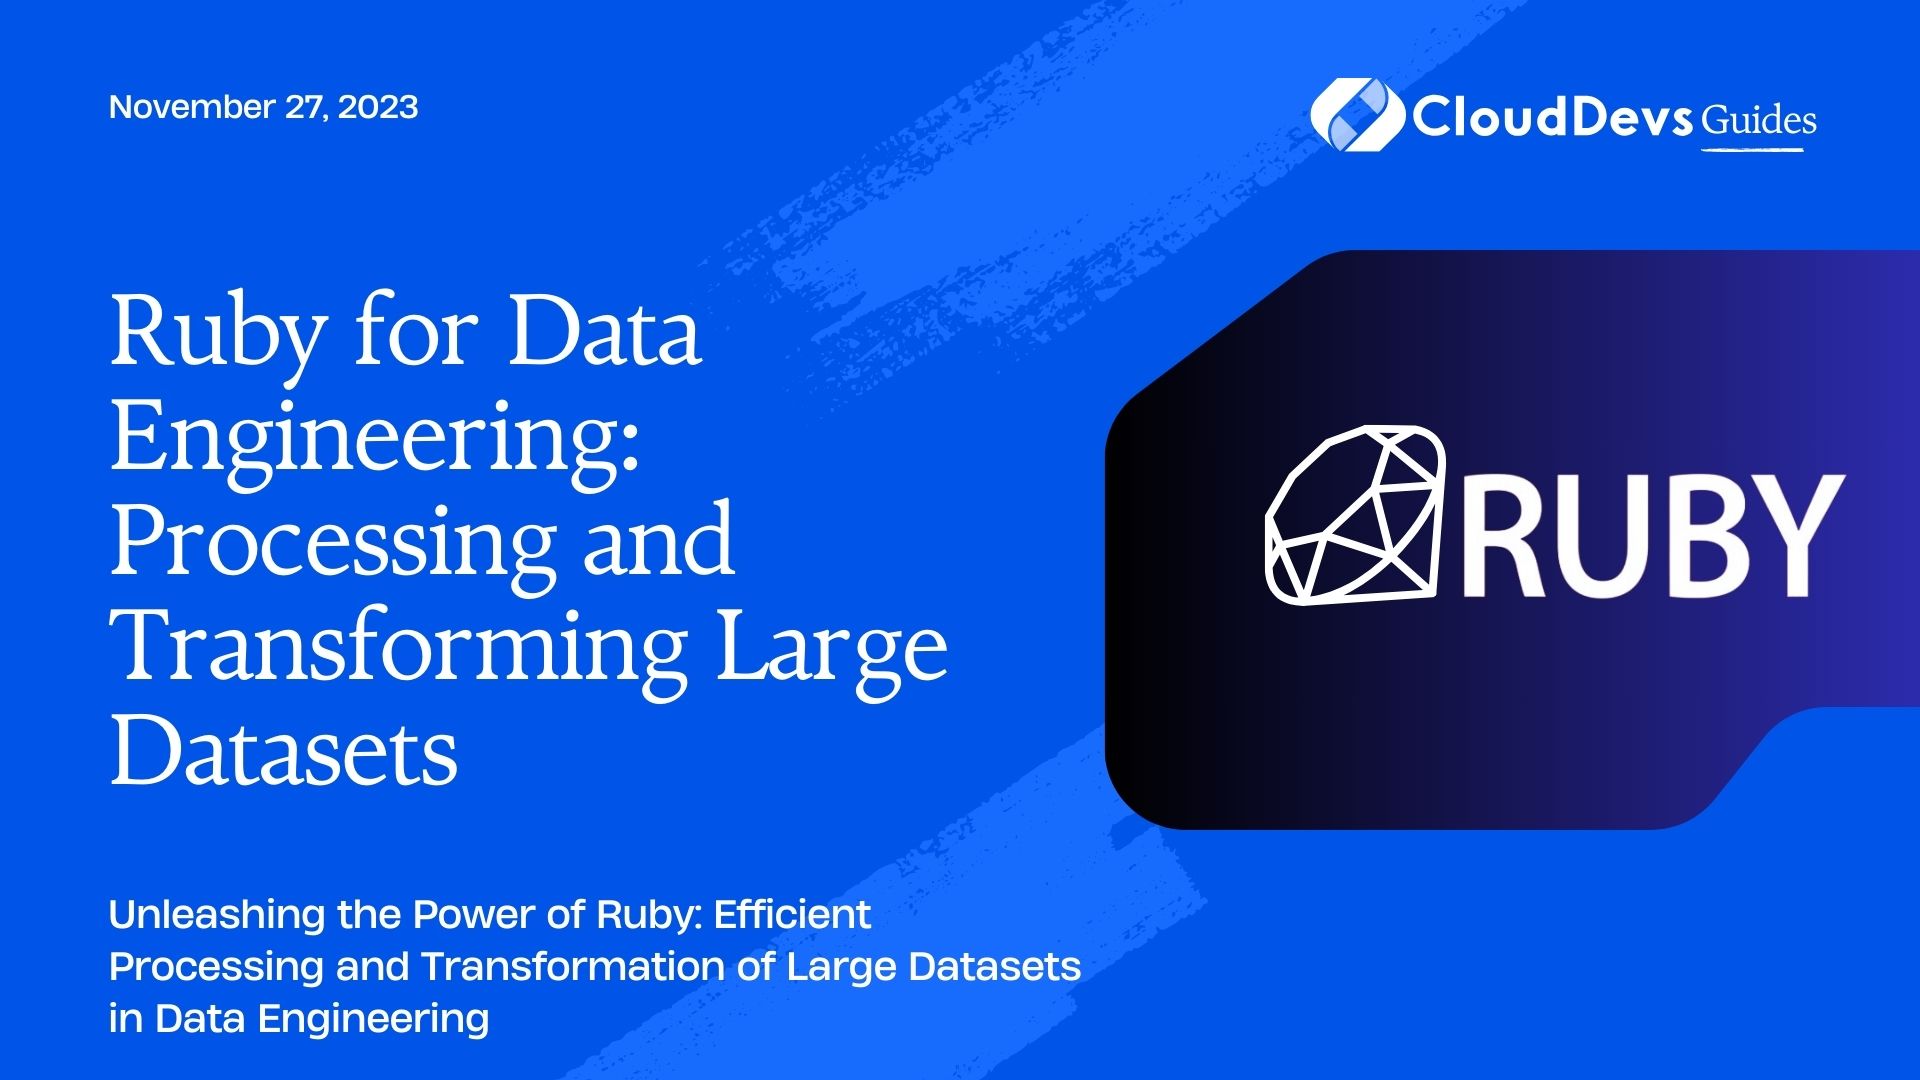 Ruby for Data Engineering: Processing and Transforming Large Datasets